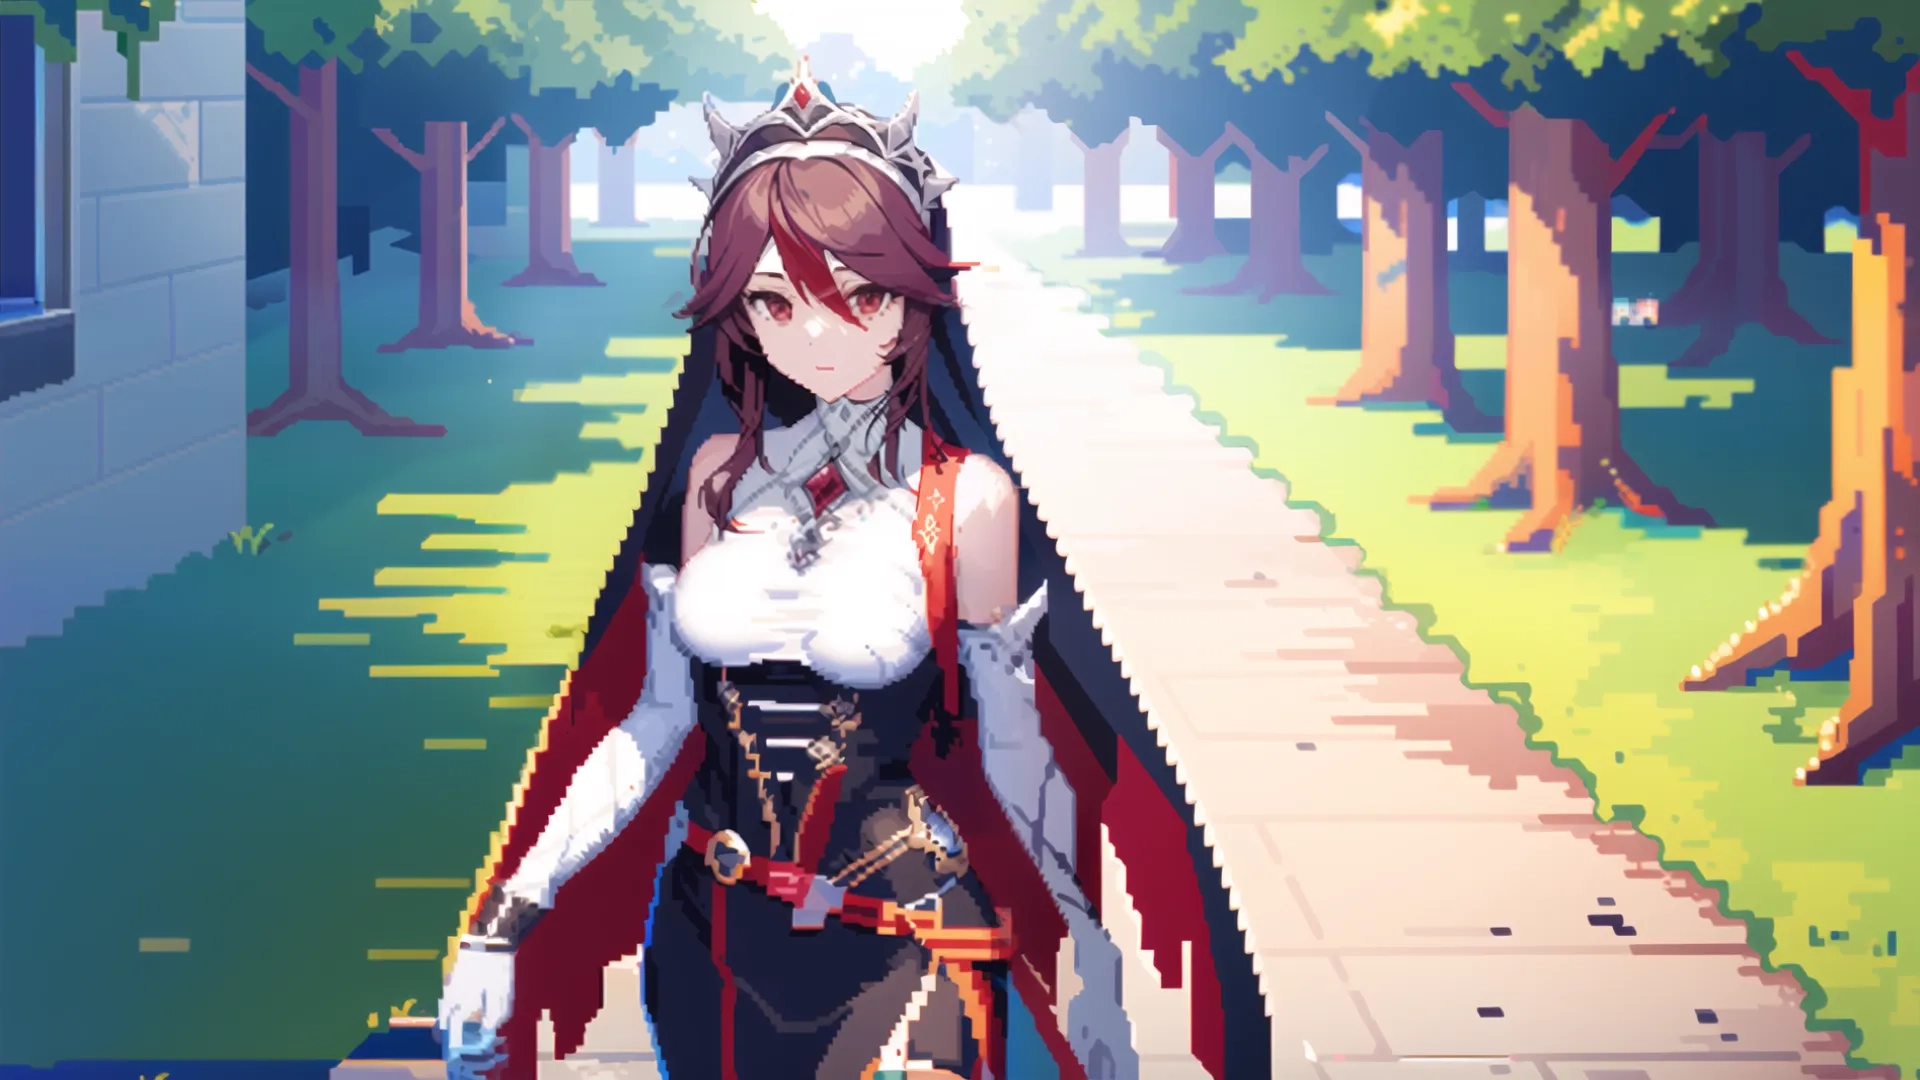 woman in white dress with sword walks on grass next to tree walk way in anime game style area, stylized image and screen shot from camera and pixel art
